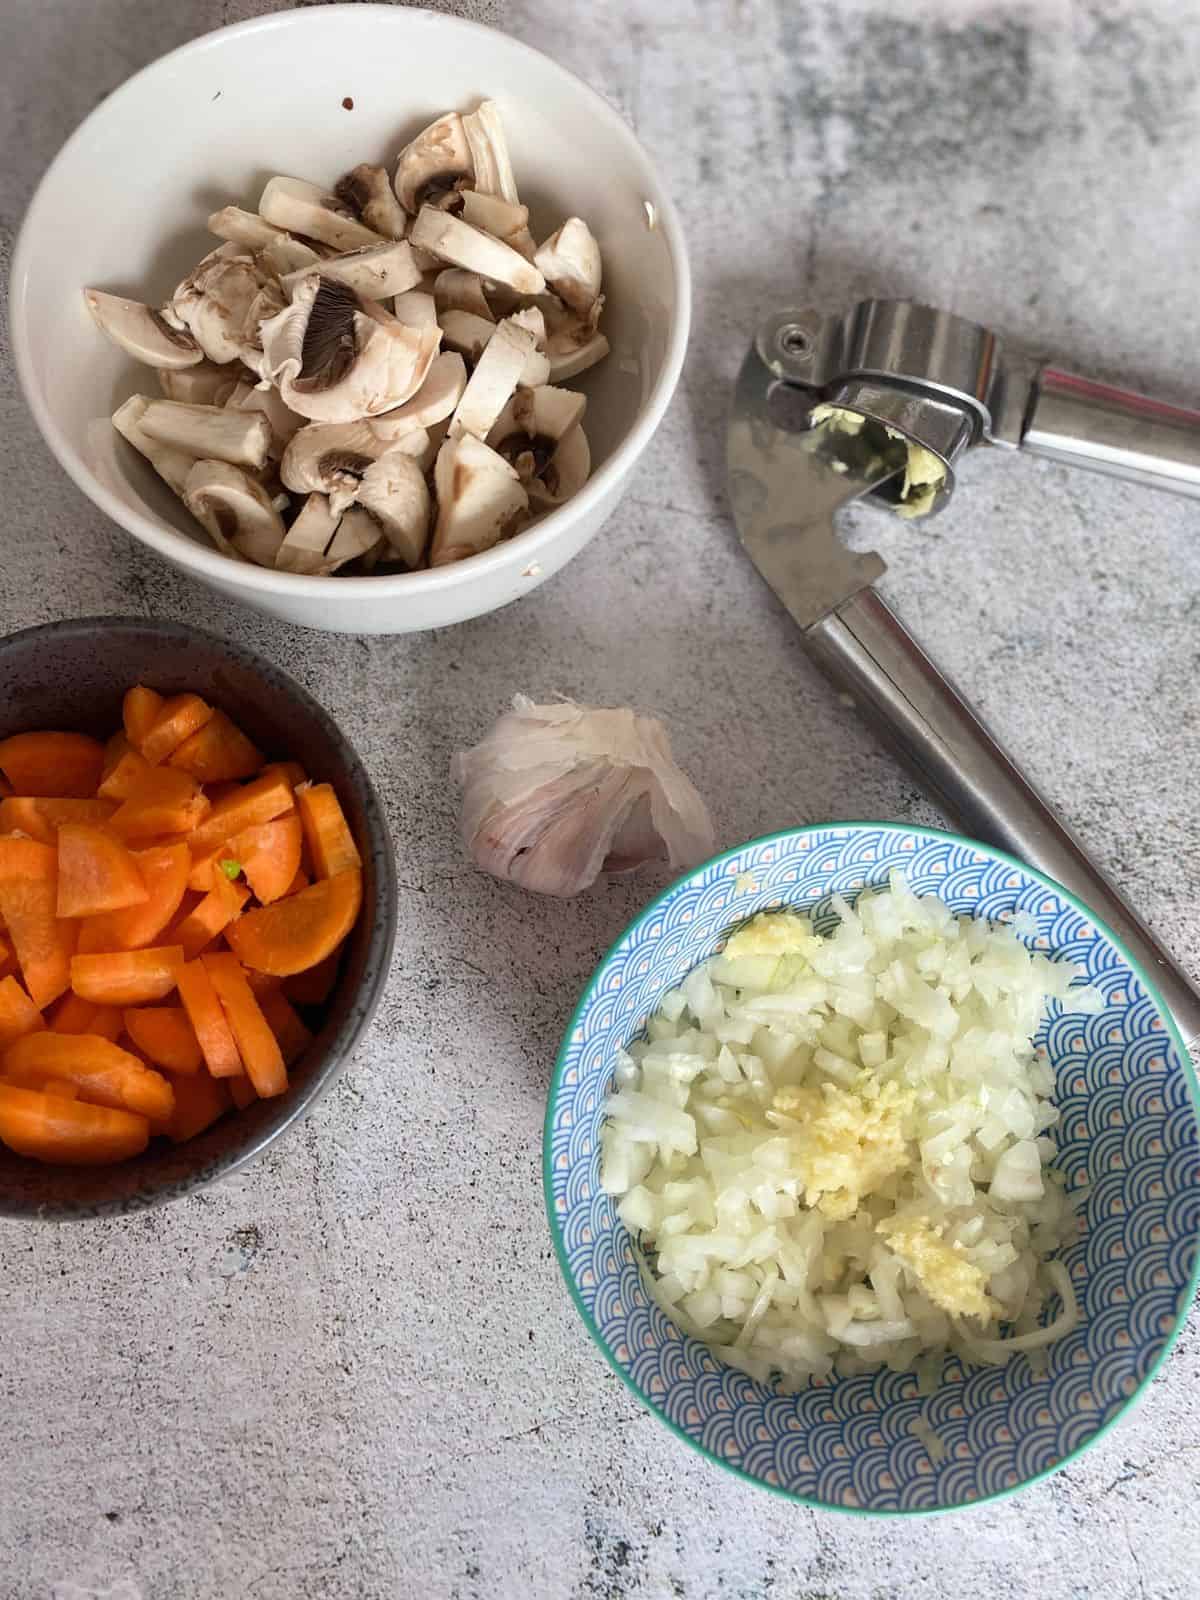 Three bowls containing chopped mushrooms, carrots and onions. Placed next to them is a garlic press and a bulb of garlic.